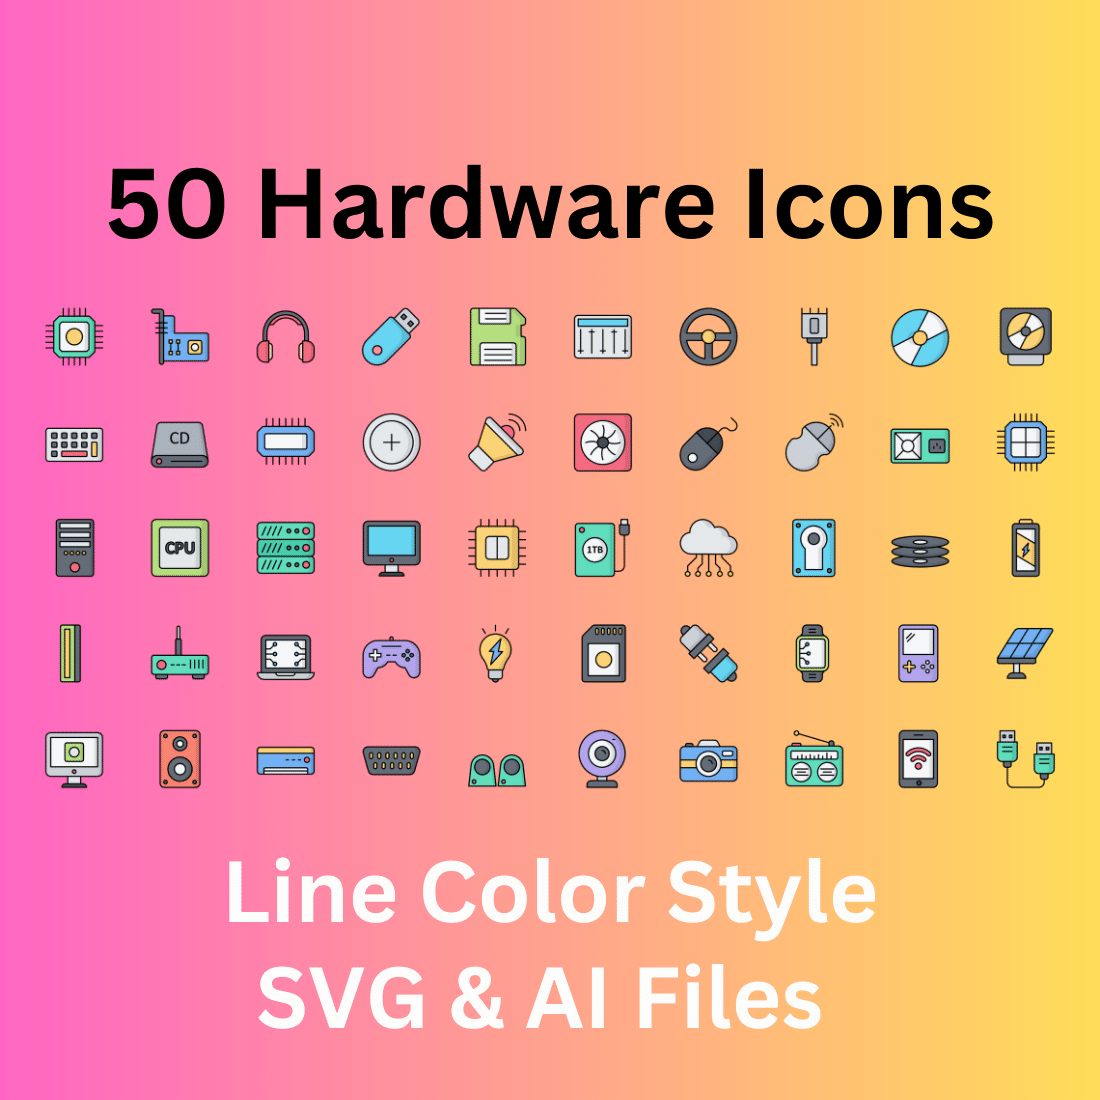 Hardware Set 50 Line Color Icons - SVG And AI Files cover image.